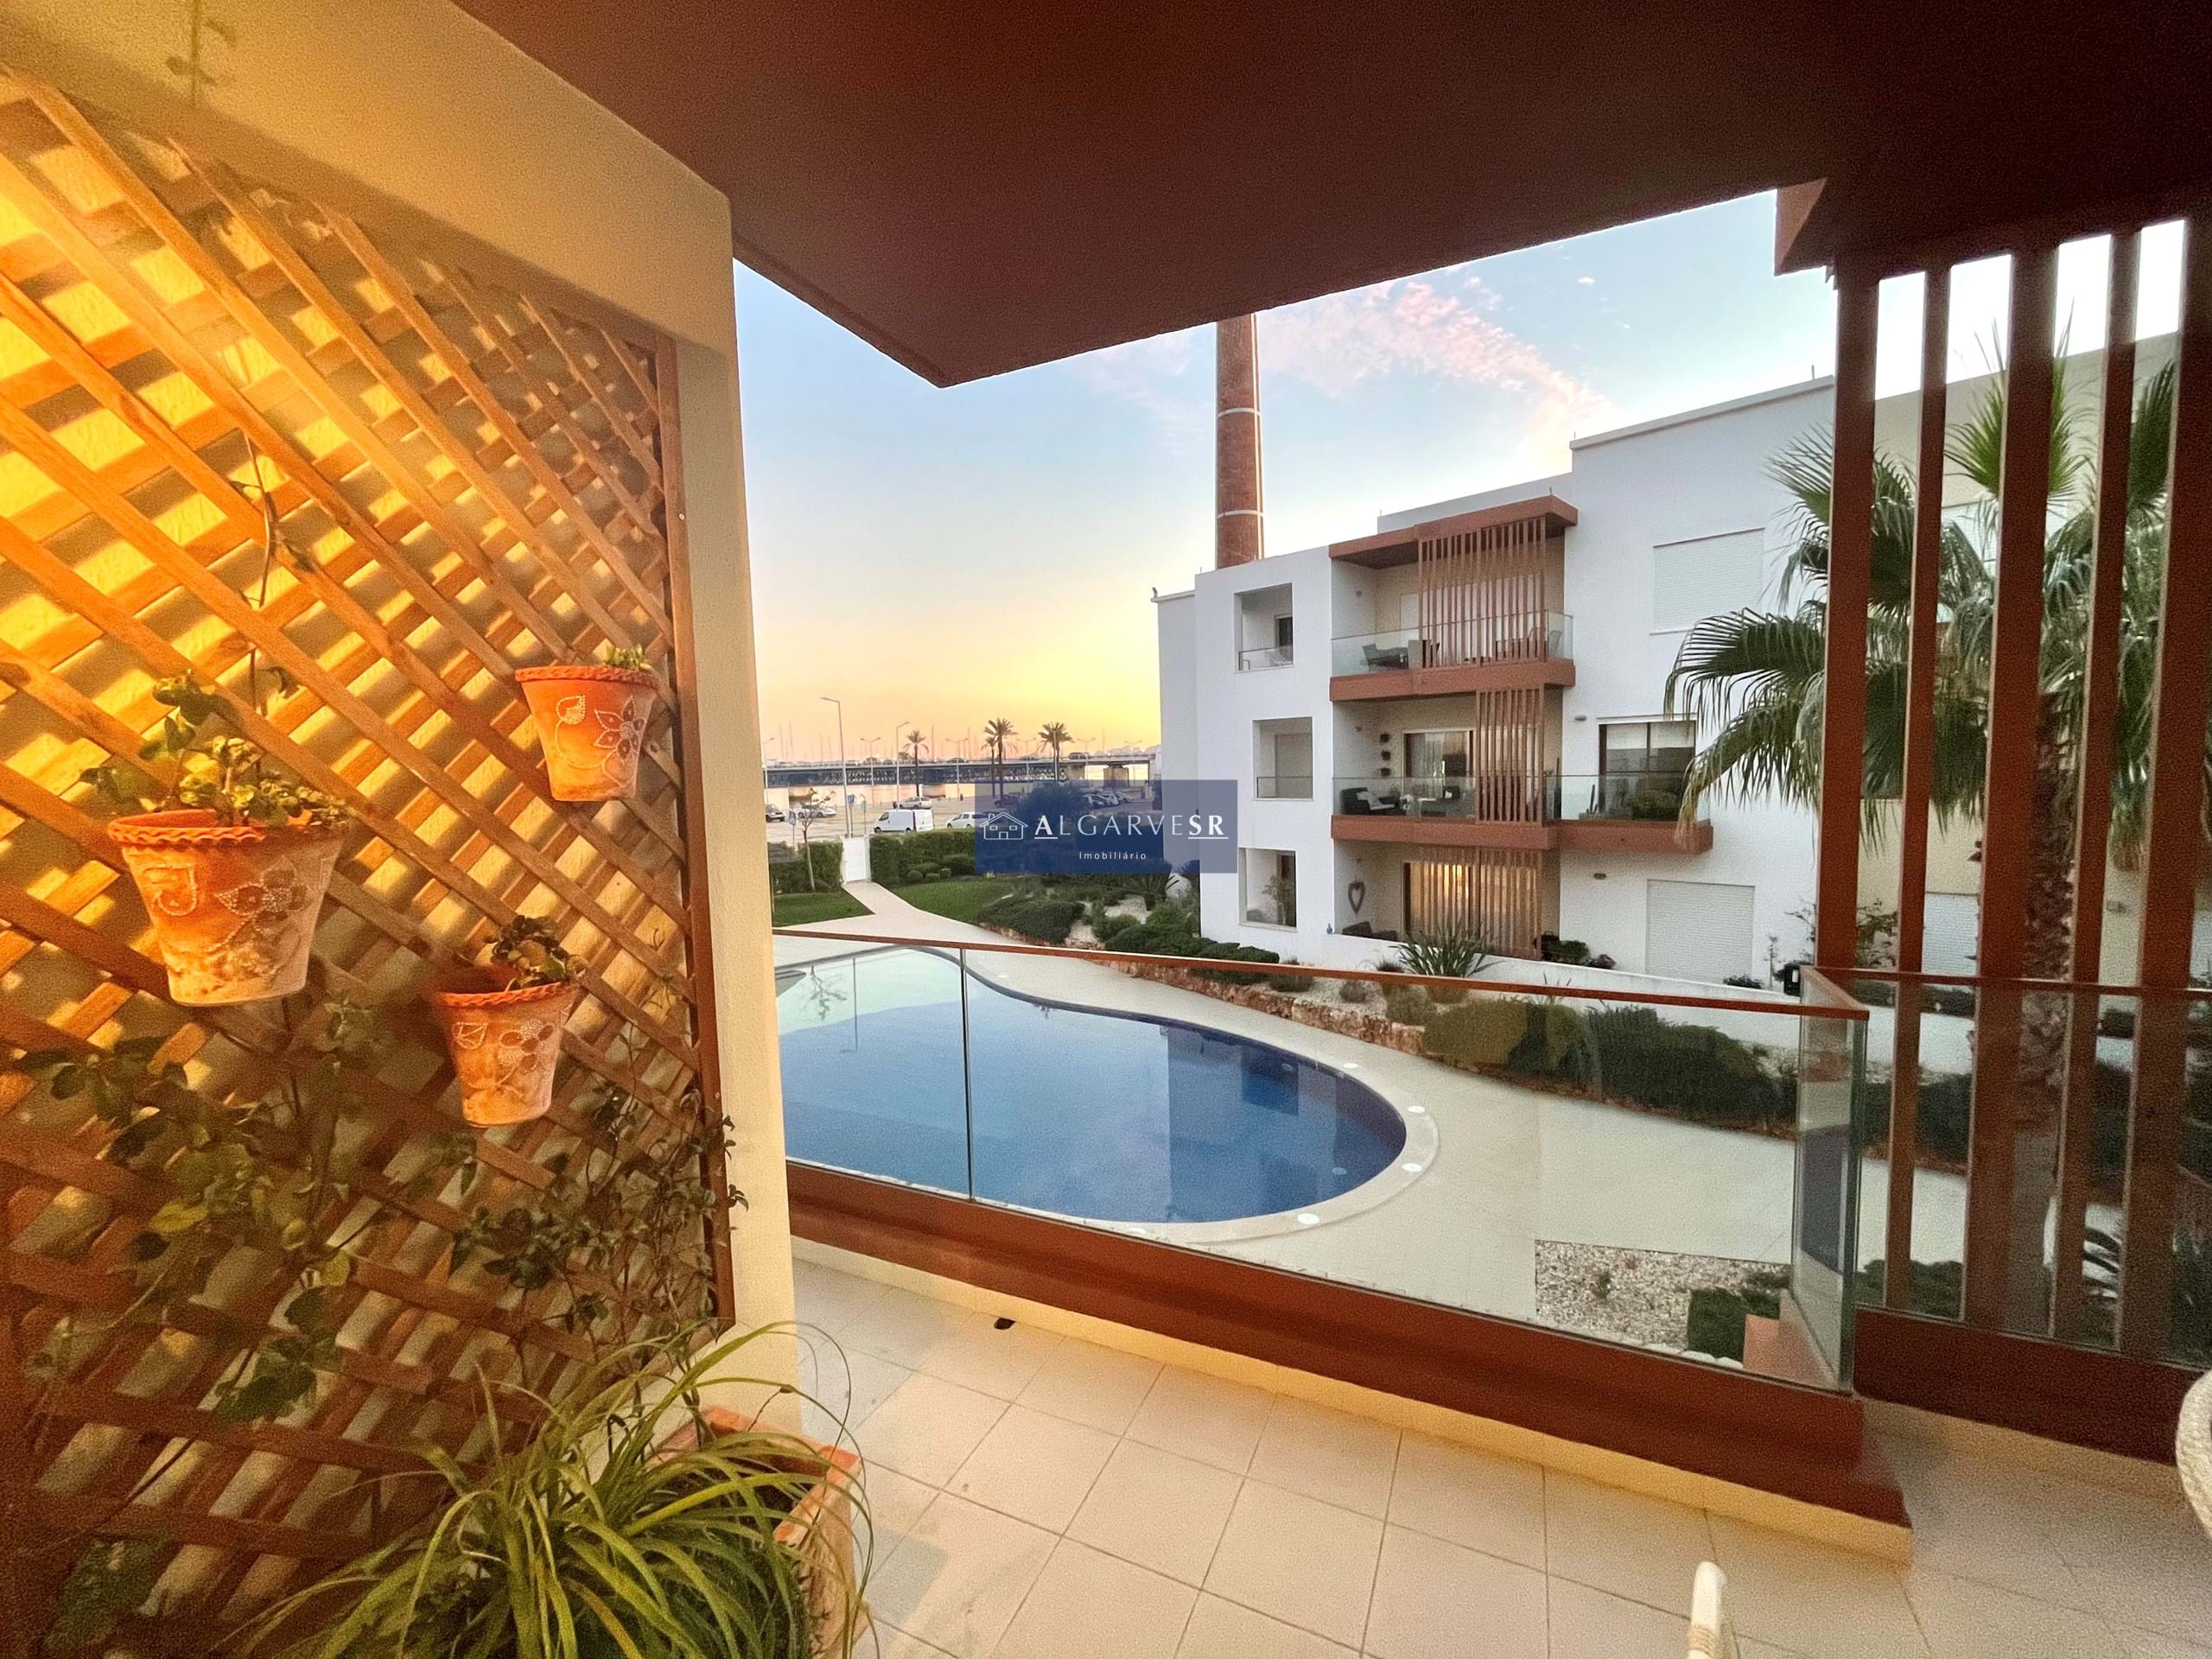 Fabulous 2 Bedroom Apartment with Pool and Closed Garage - Riverside Portimao